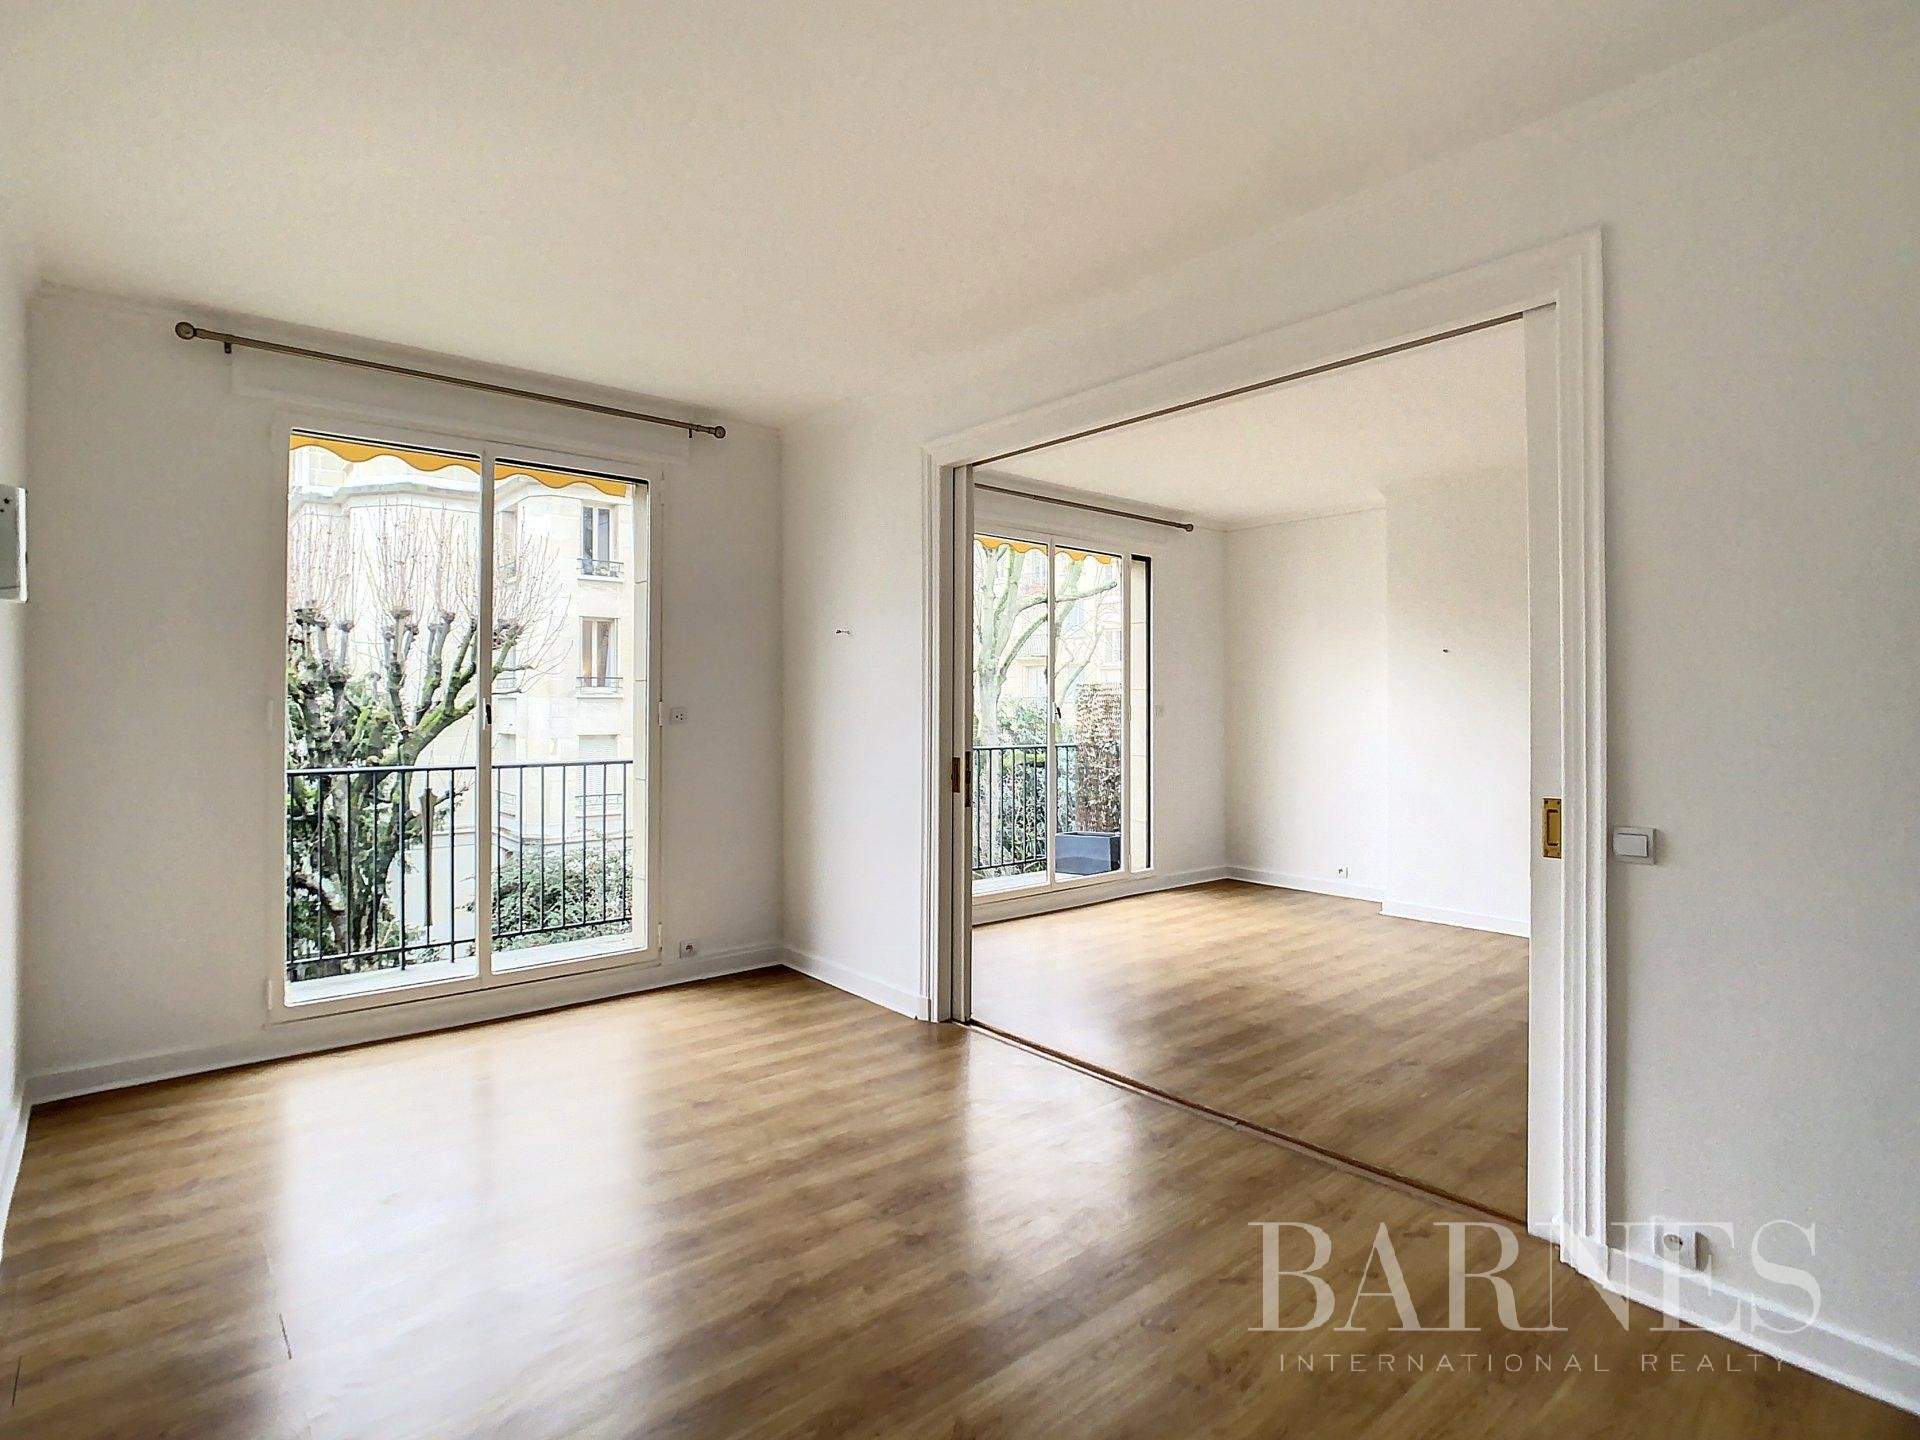 Apartment to rent 1 Bedroom 603 sq ft Neuilly-sur-Seine Perronet-Chézy ...